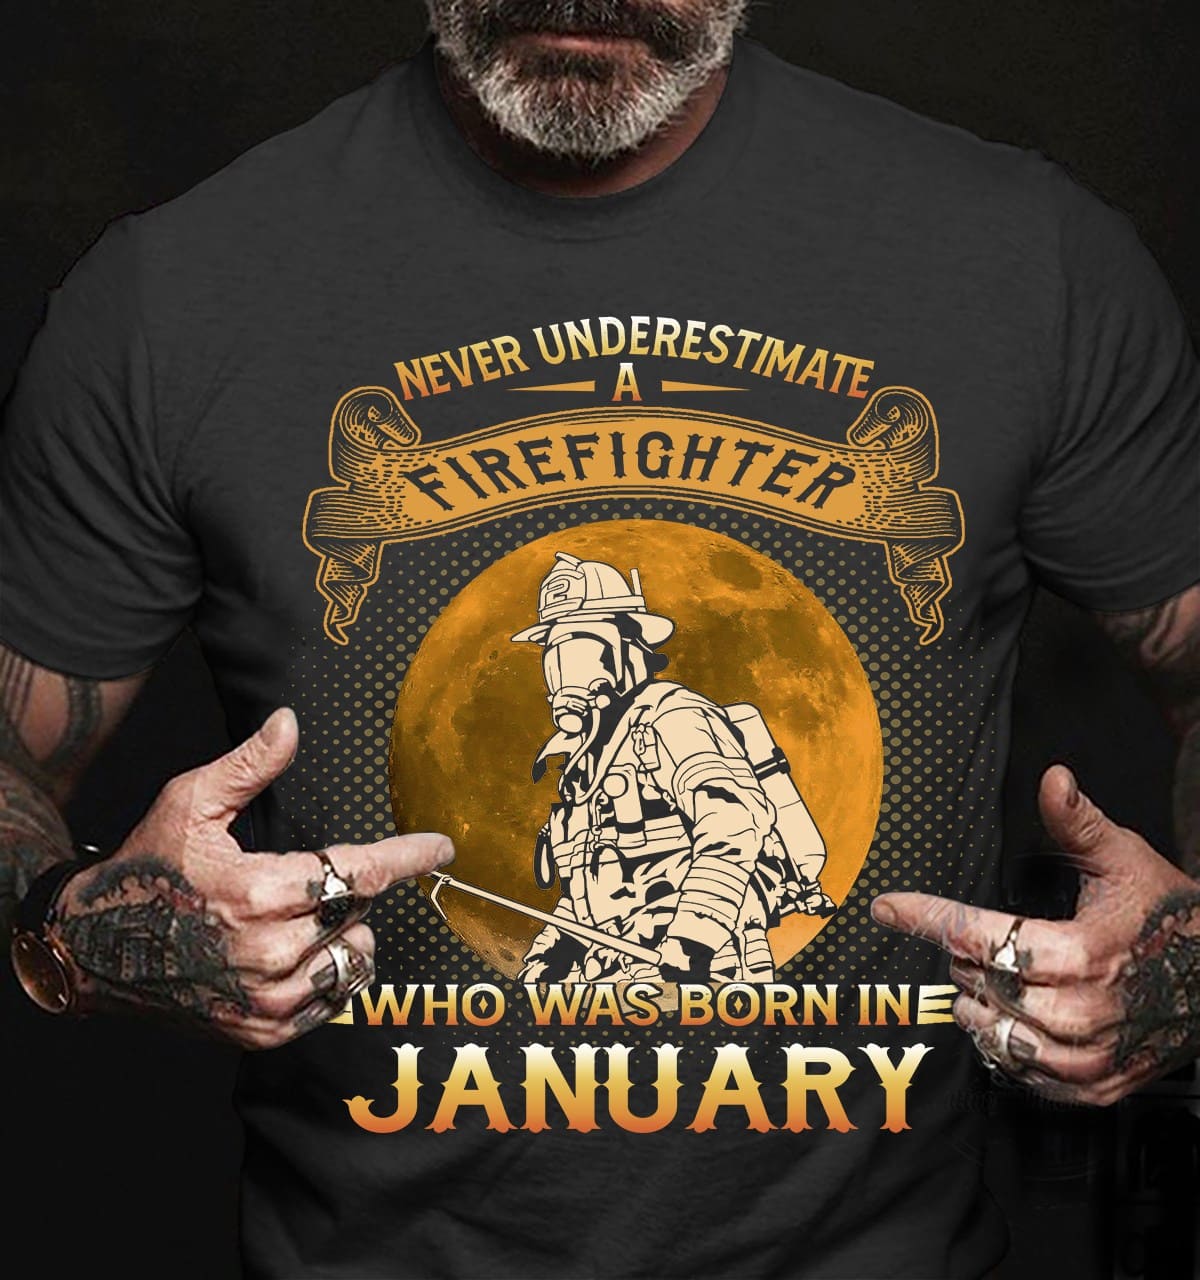 Never underestimate a firefighter who was born in January - T-shirt for Firefighter